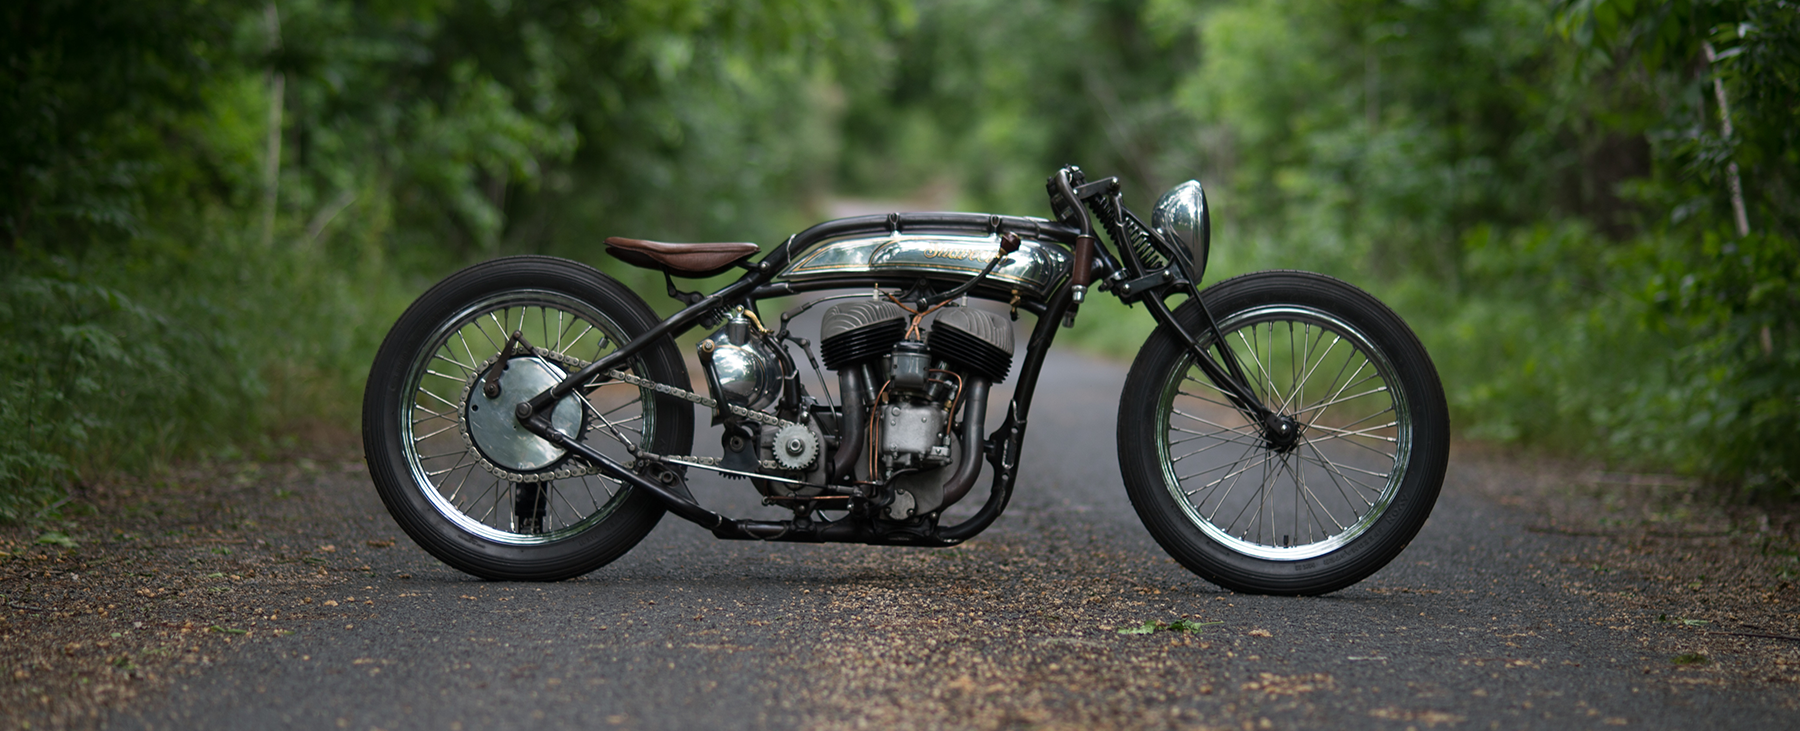 INDIAN SCOUT - Header Image